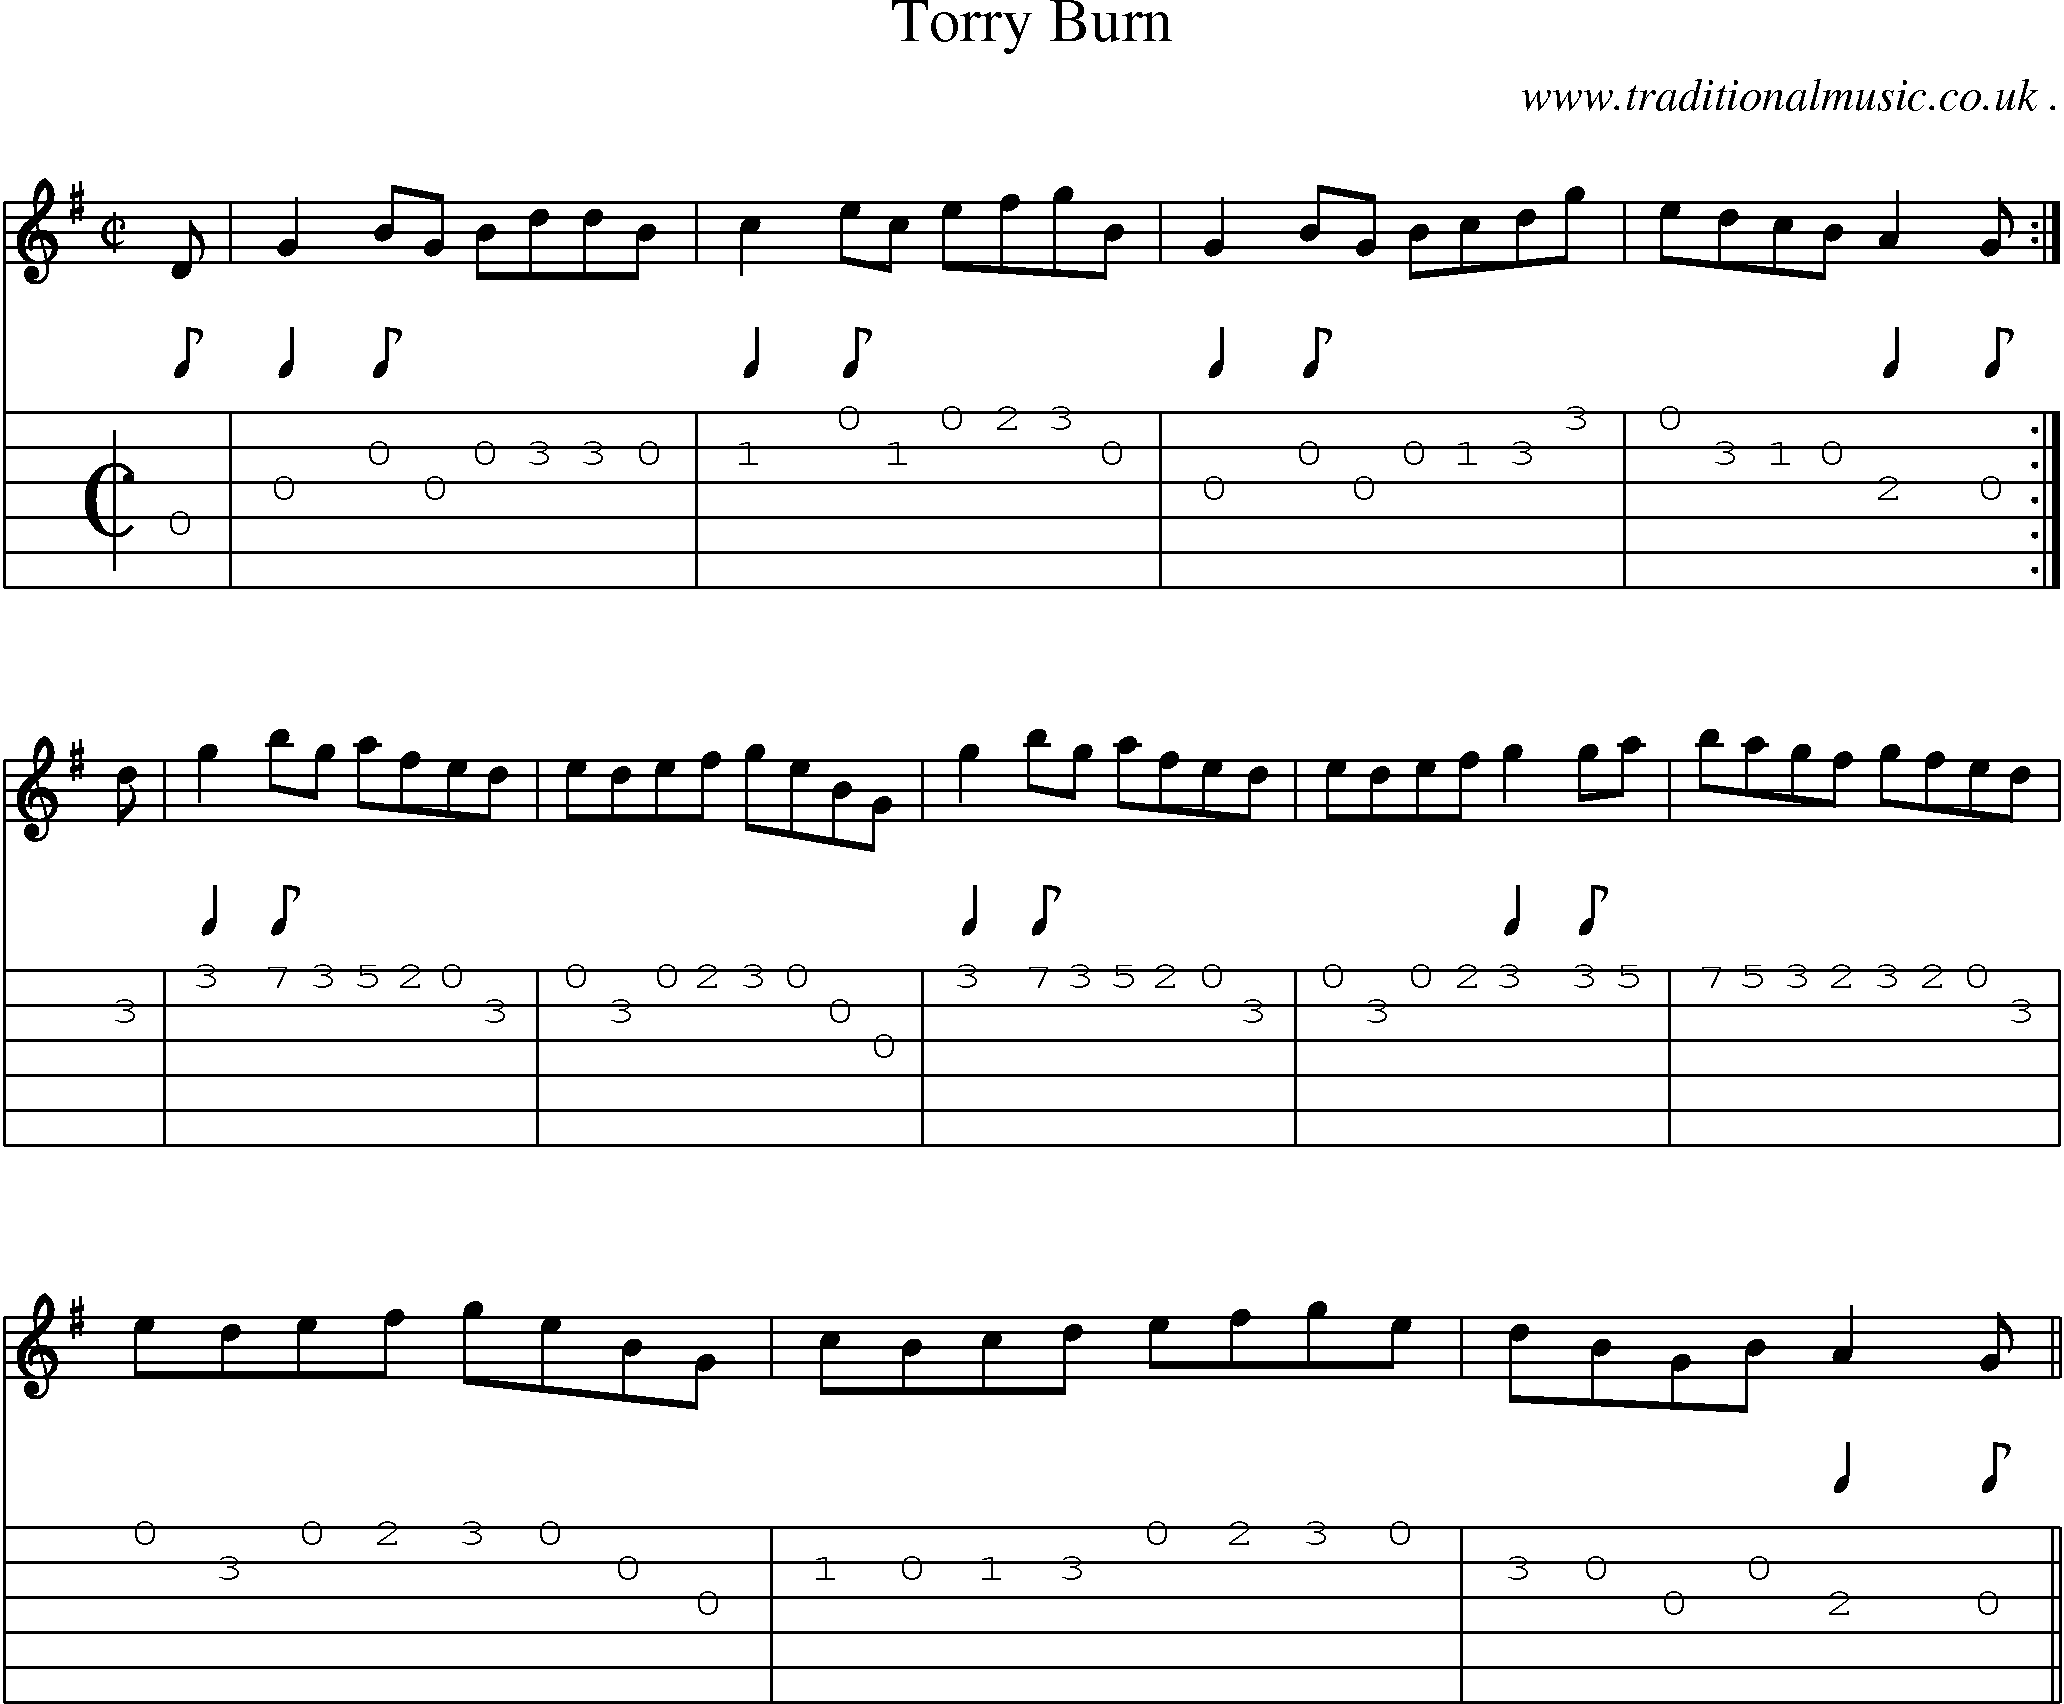 Sheet-music  score, Chords and Guitar Tabs for Torry Burn